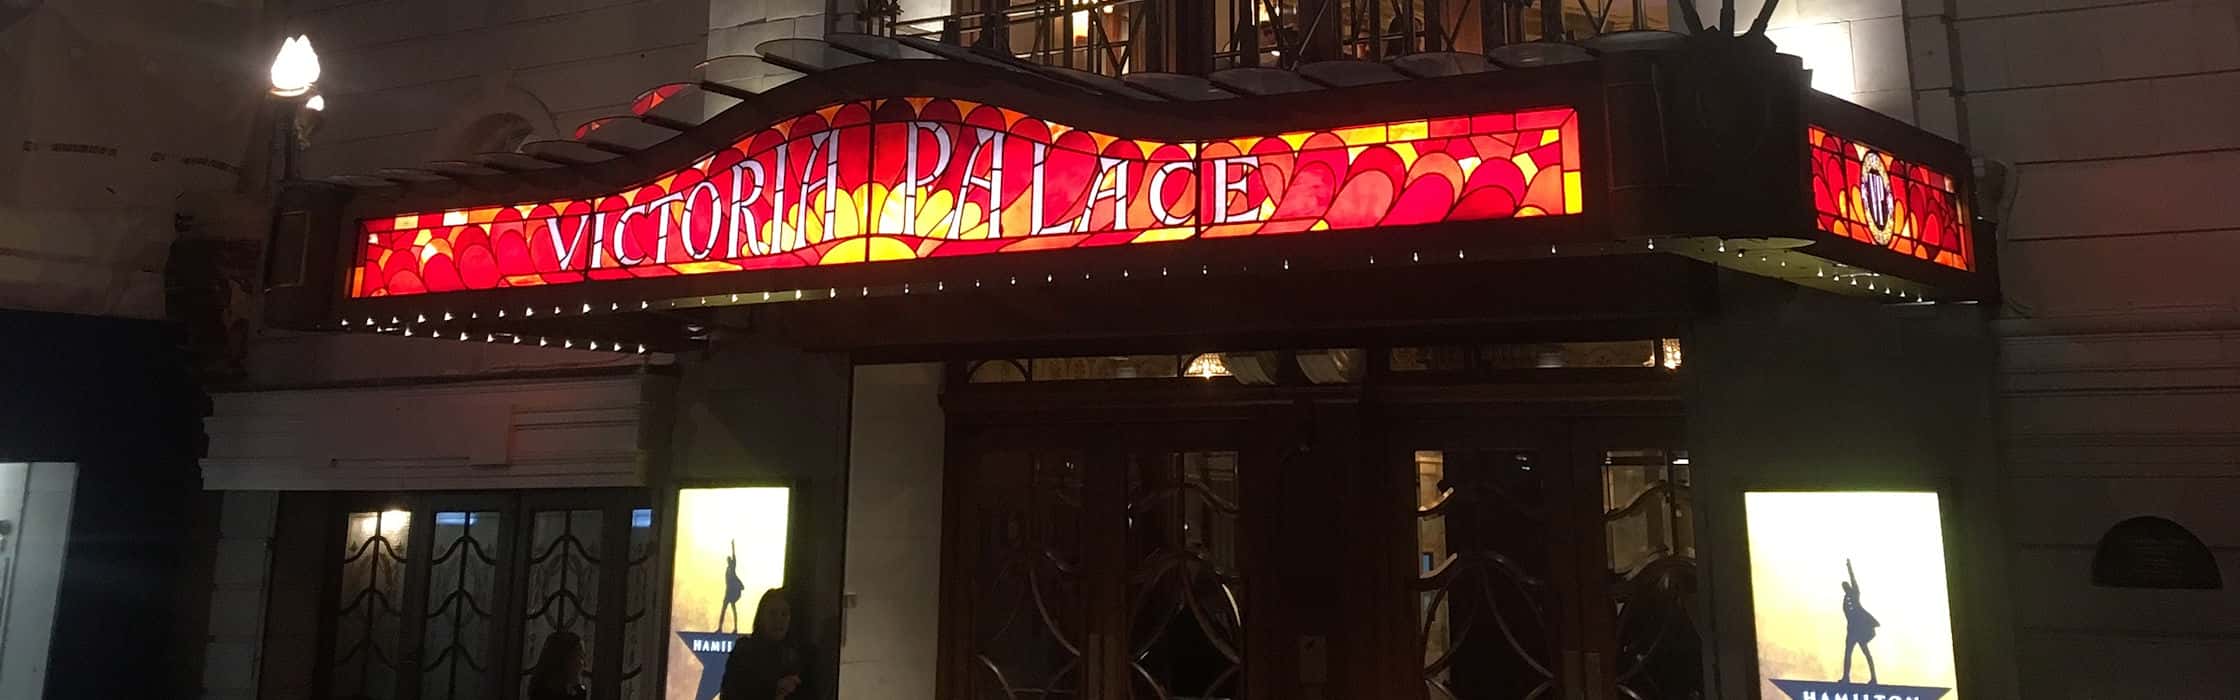 What's On at the Victoria Palace Theatre, London